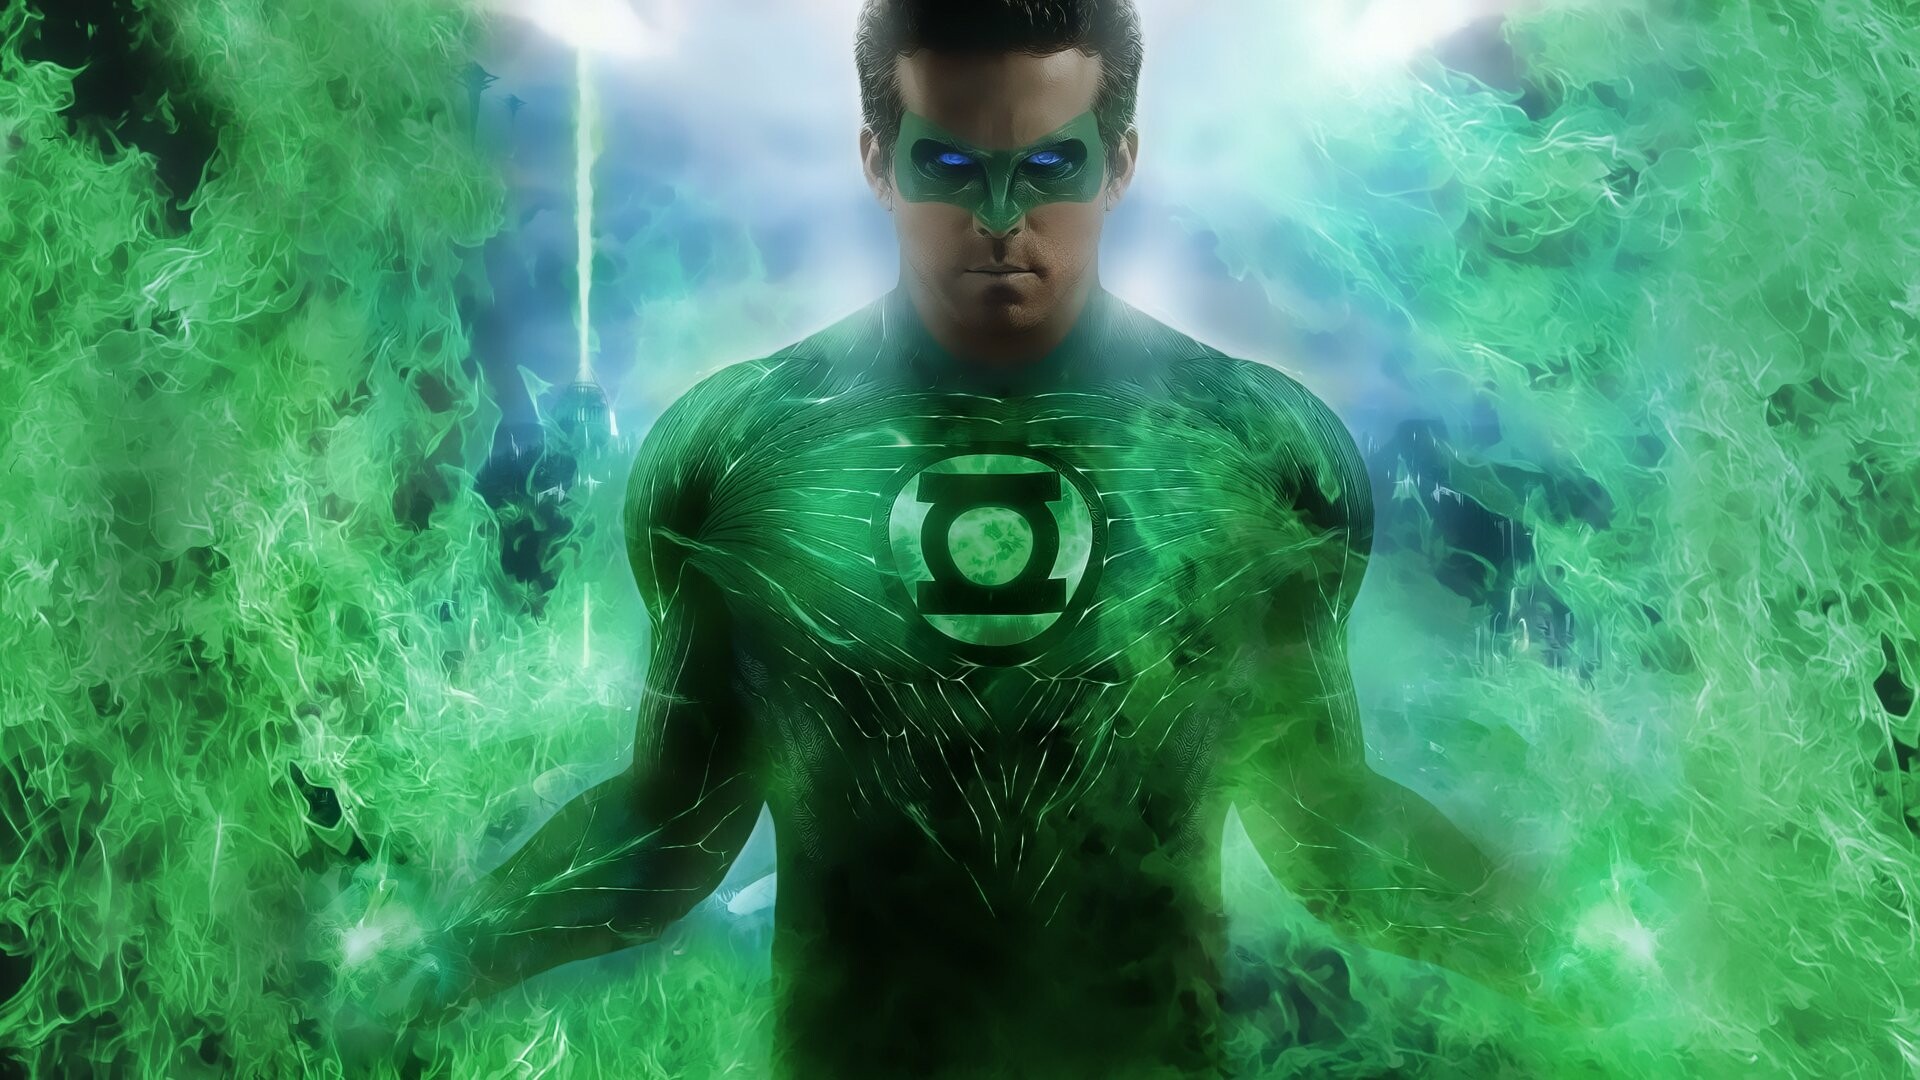 Green Lantern: Hal Jordan, must confront Parallax, who threatens to upset the balance of power in the universe. 1920x1080 Full HD Background.